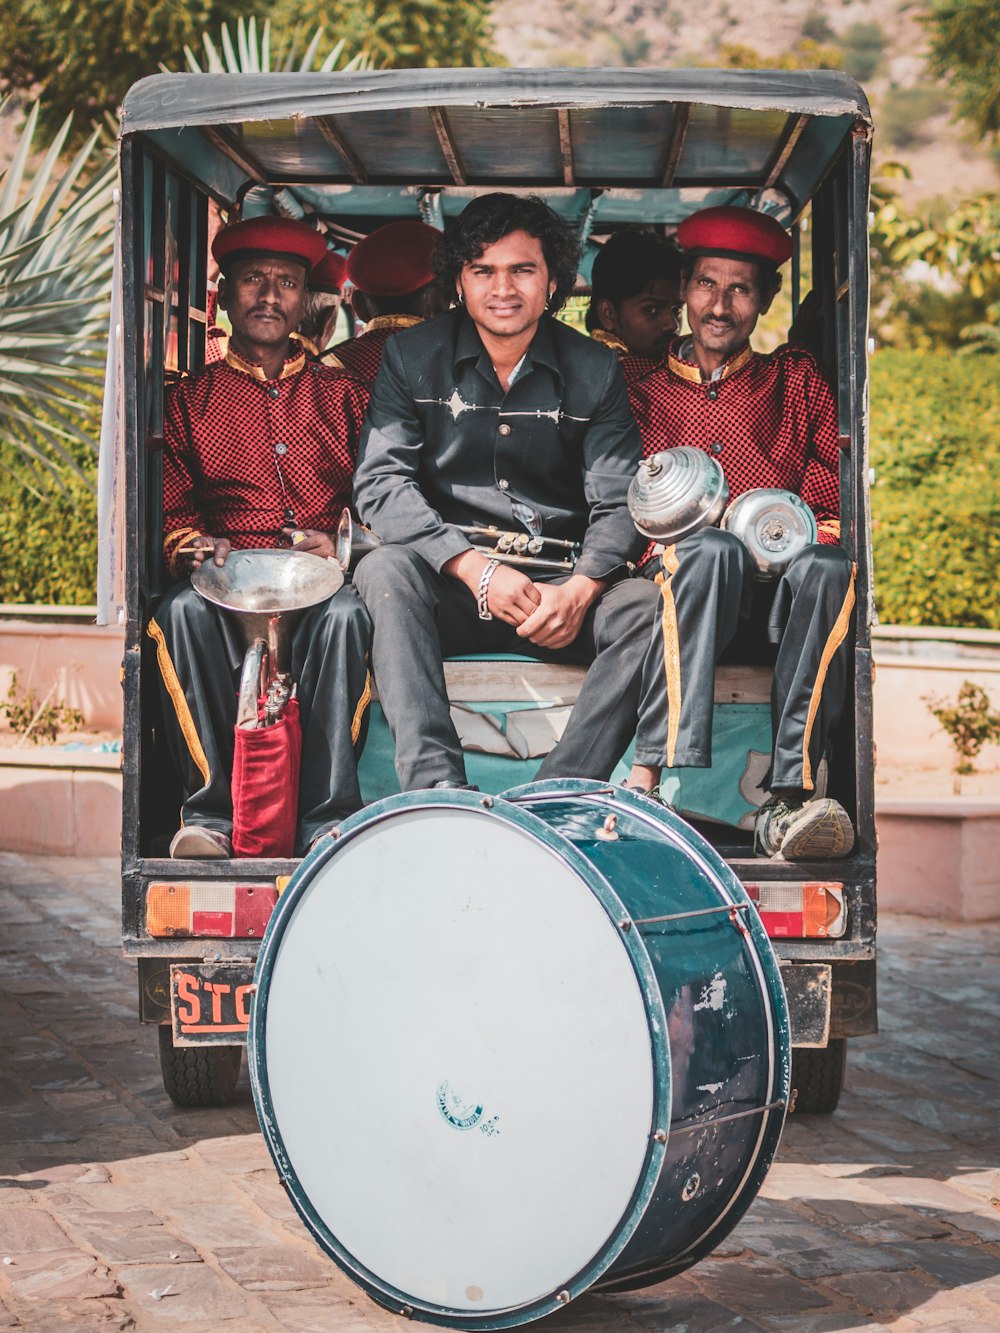 people in band uniform riding in auto rickshaw